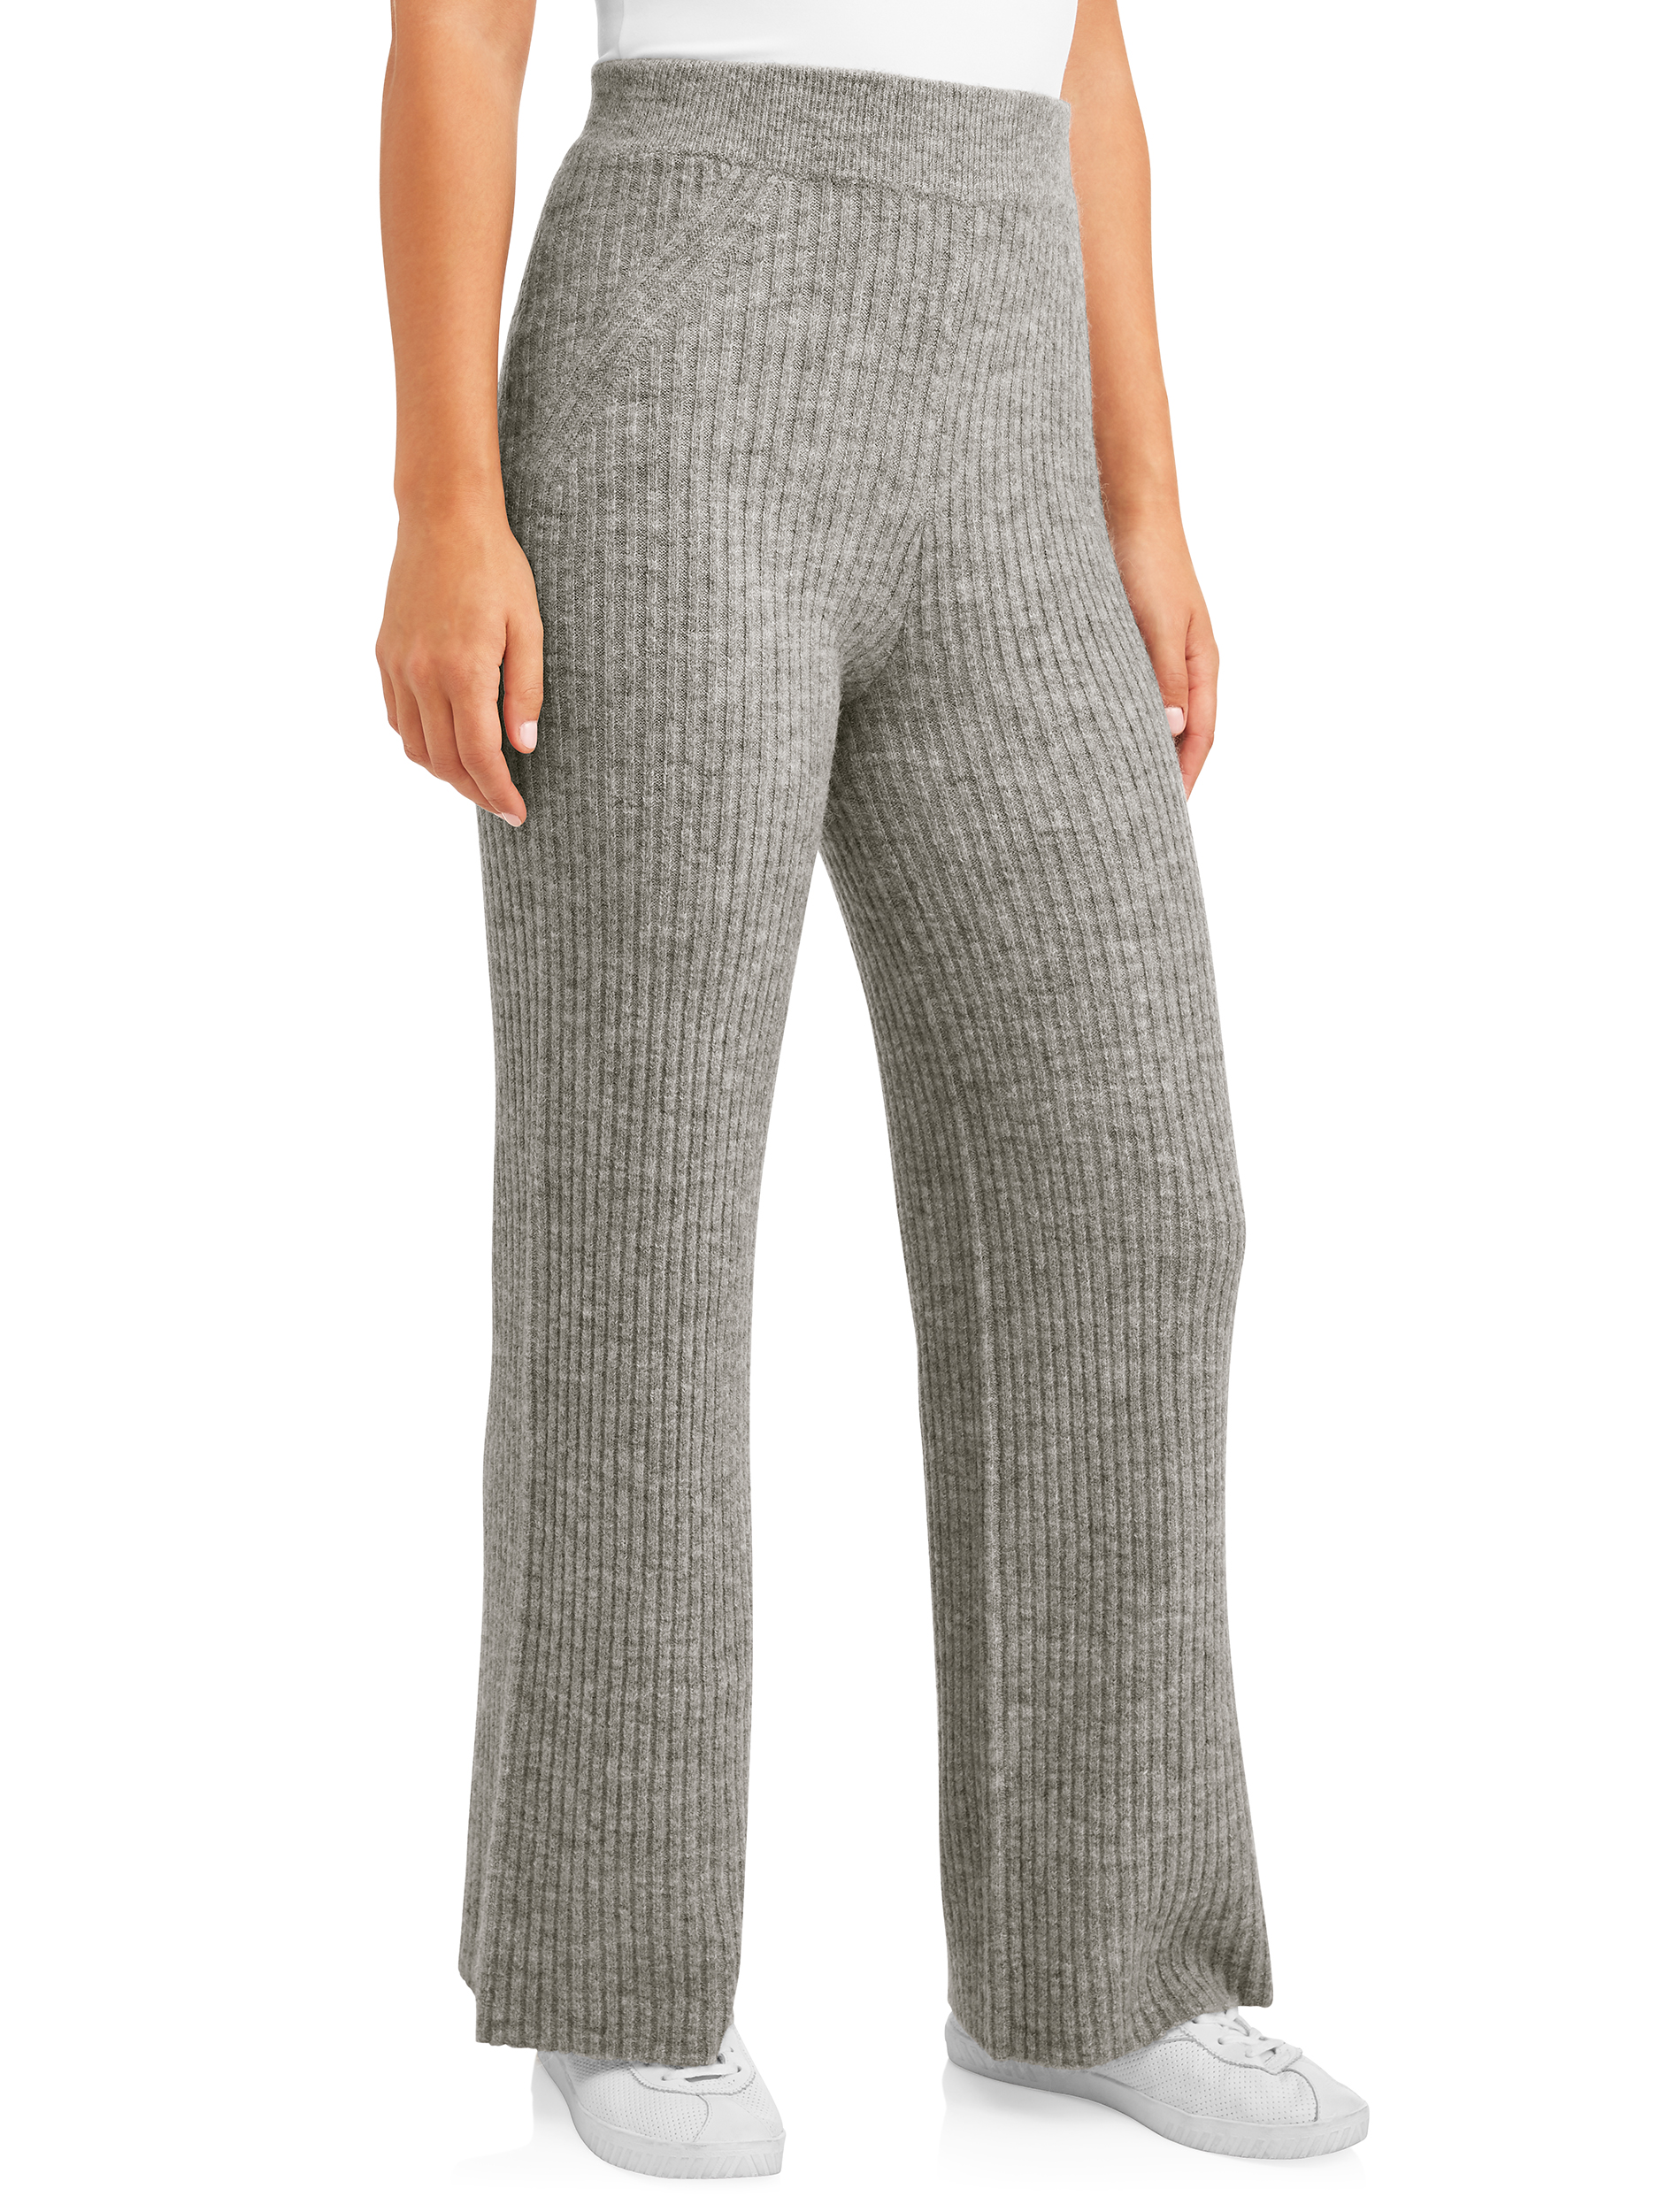 Time and Tru Cozy Knit Pant Women's - image 5 of 5